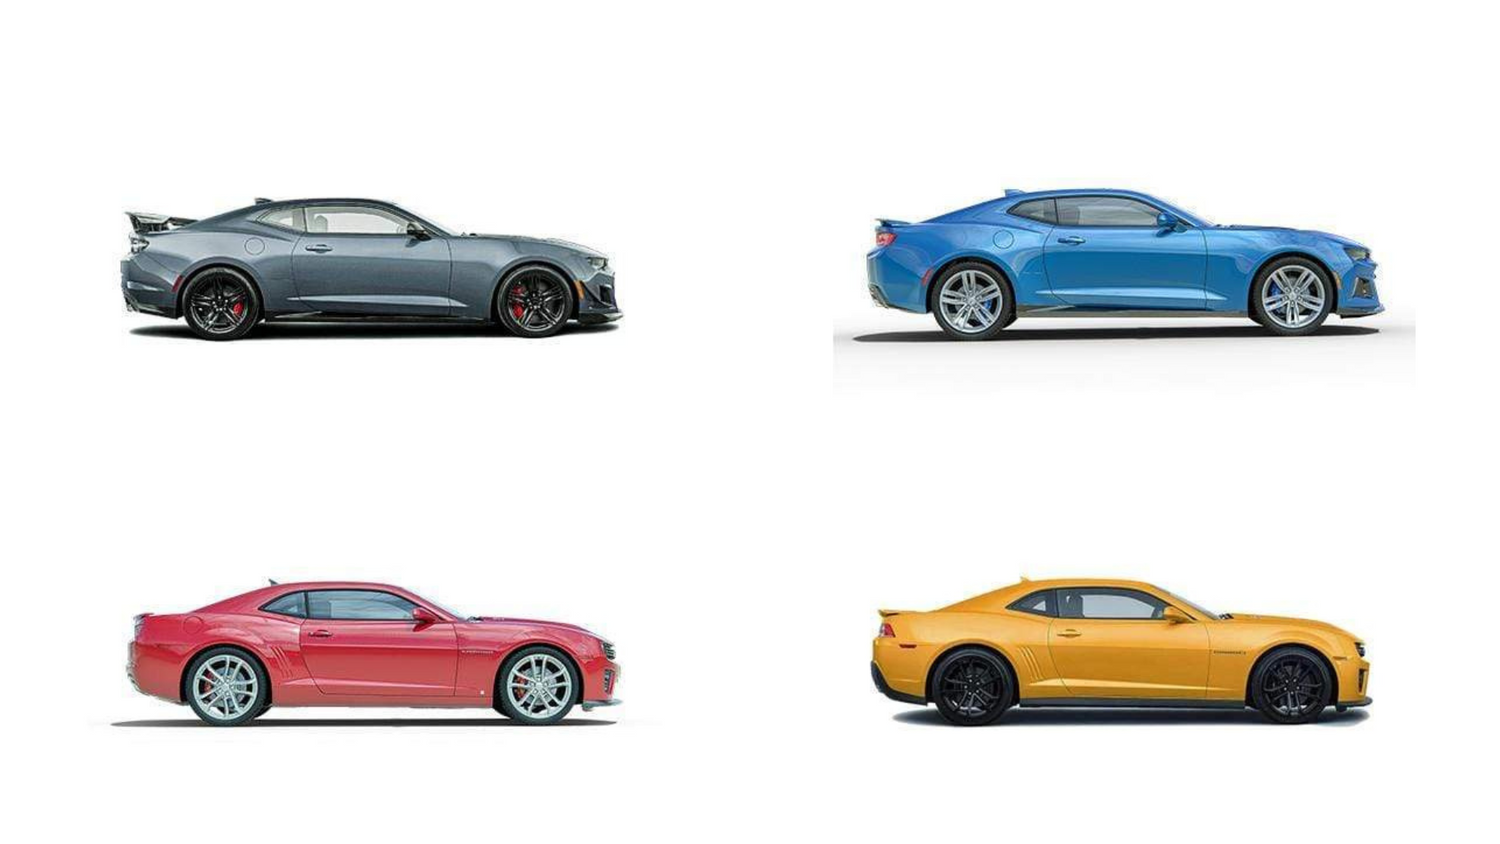 Four generations of Camaro ZL1s starting from 2010